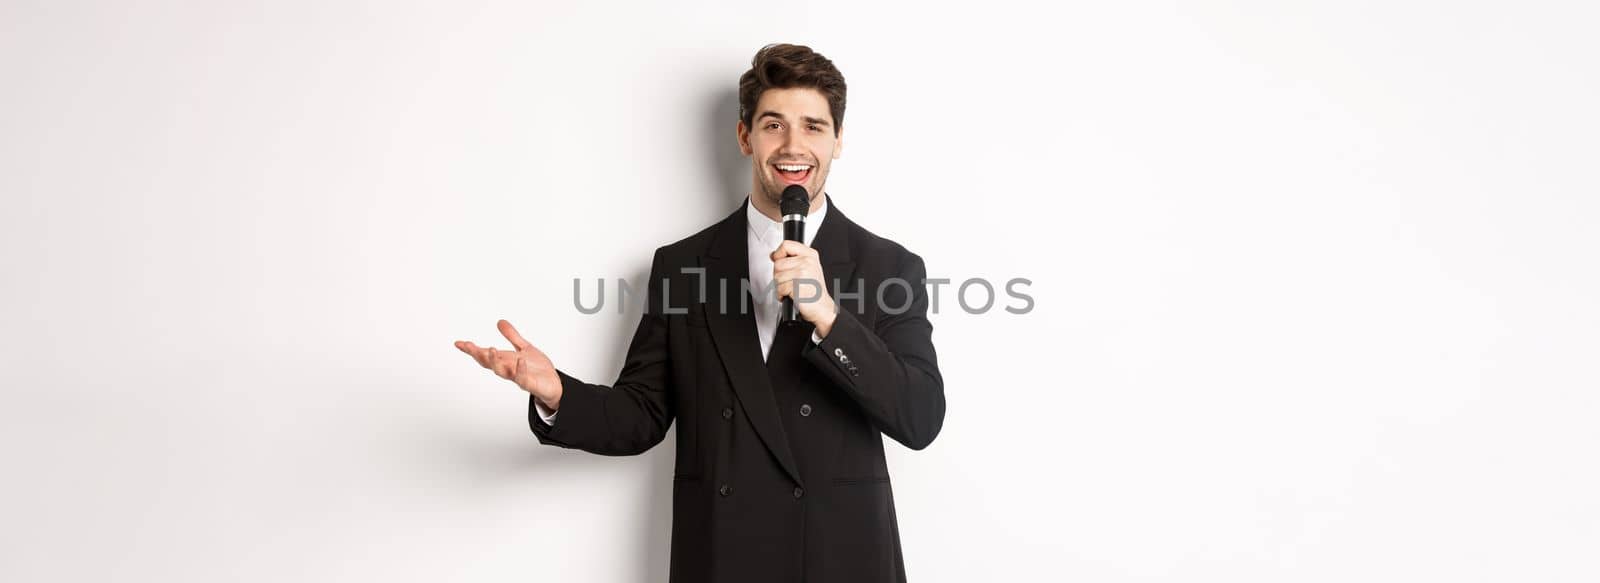 Portrait of handsome man in black suit singing a song, holding microphone and giving speech, standing against white background.